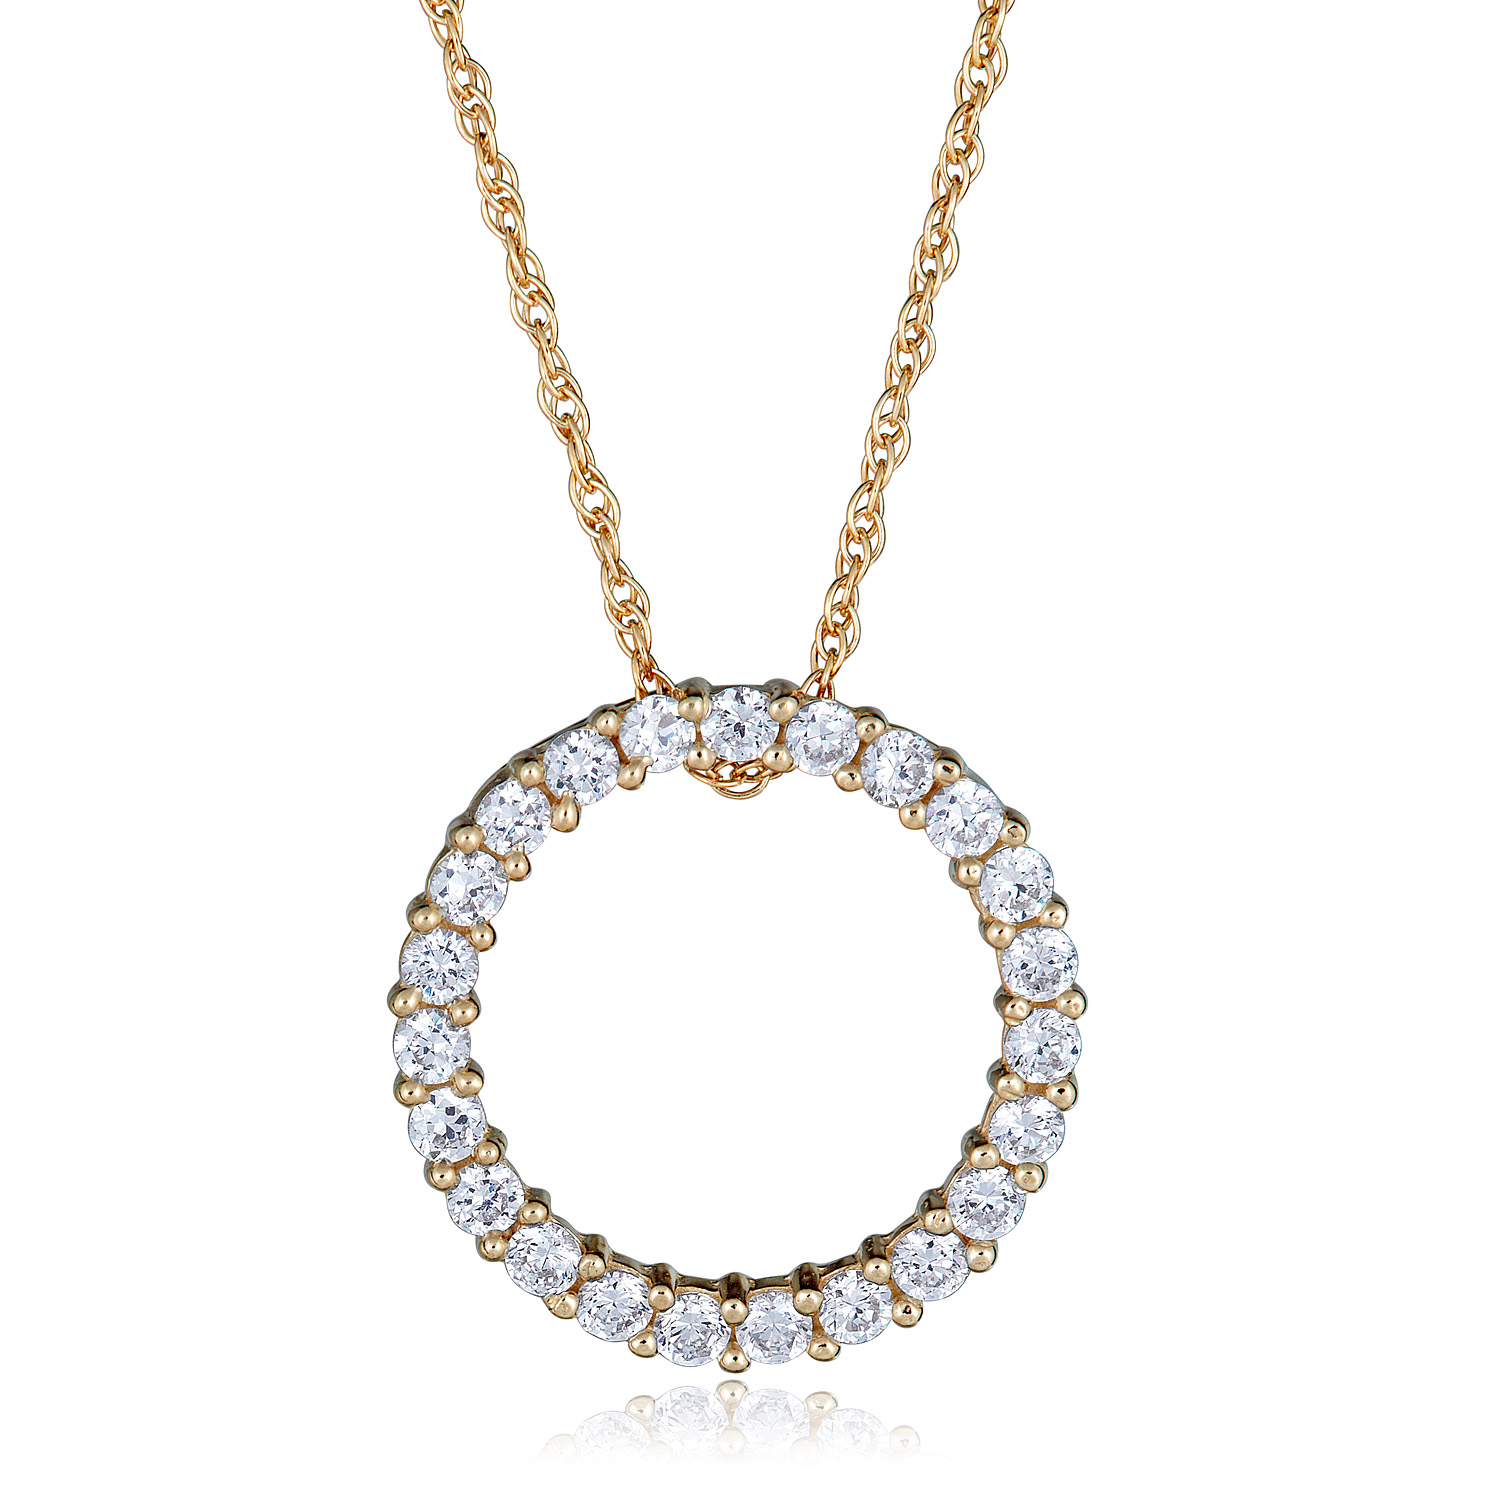 Avora 14K Gold Simulated Diamond CZ Open Circle Pendant Necklace with 18" Chain